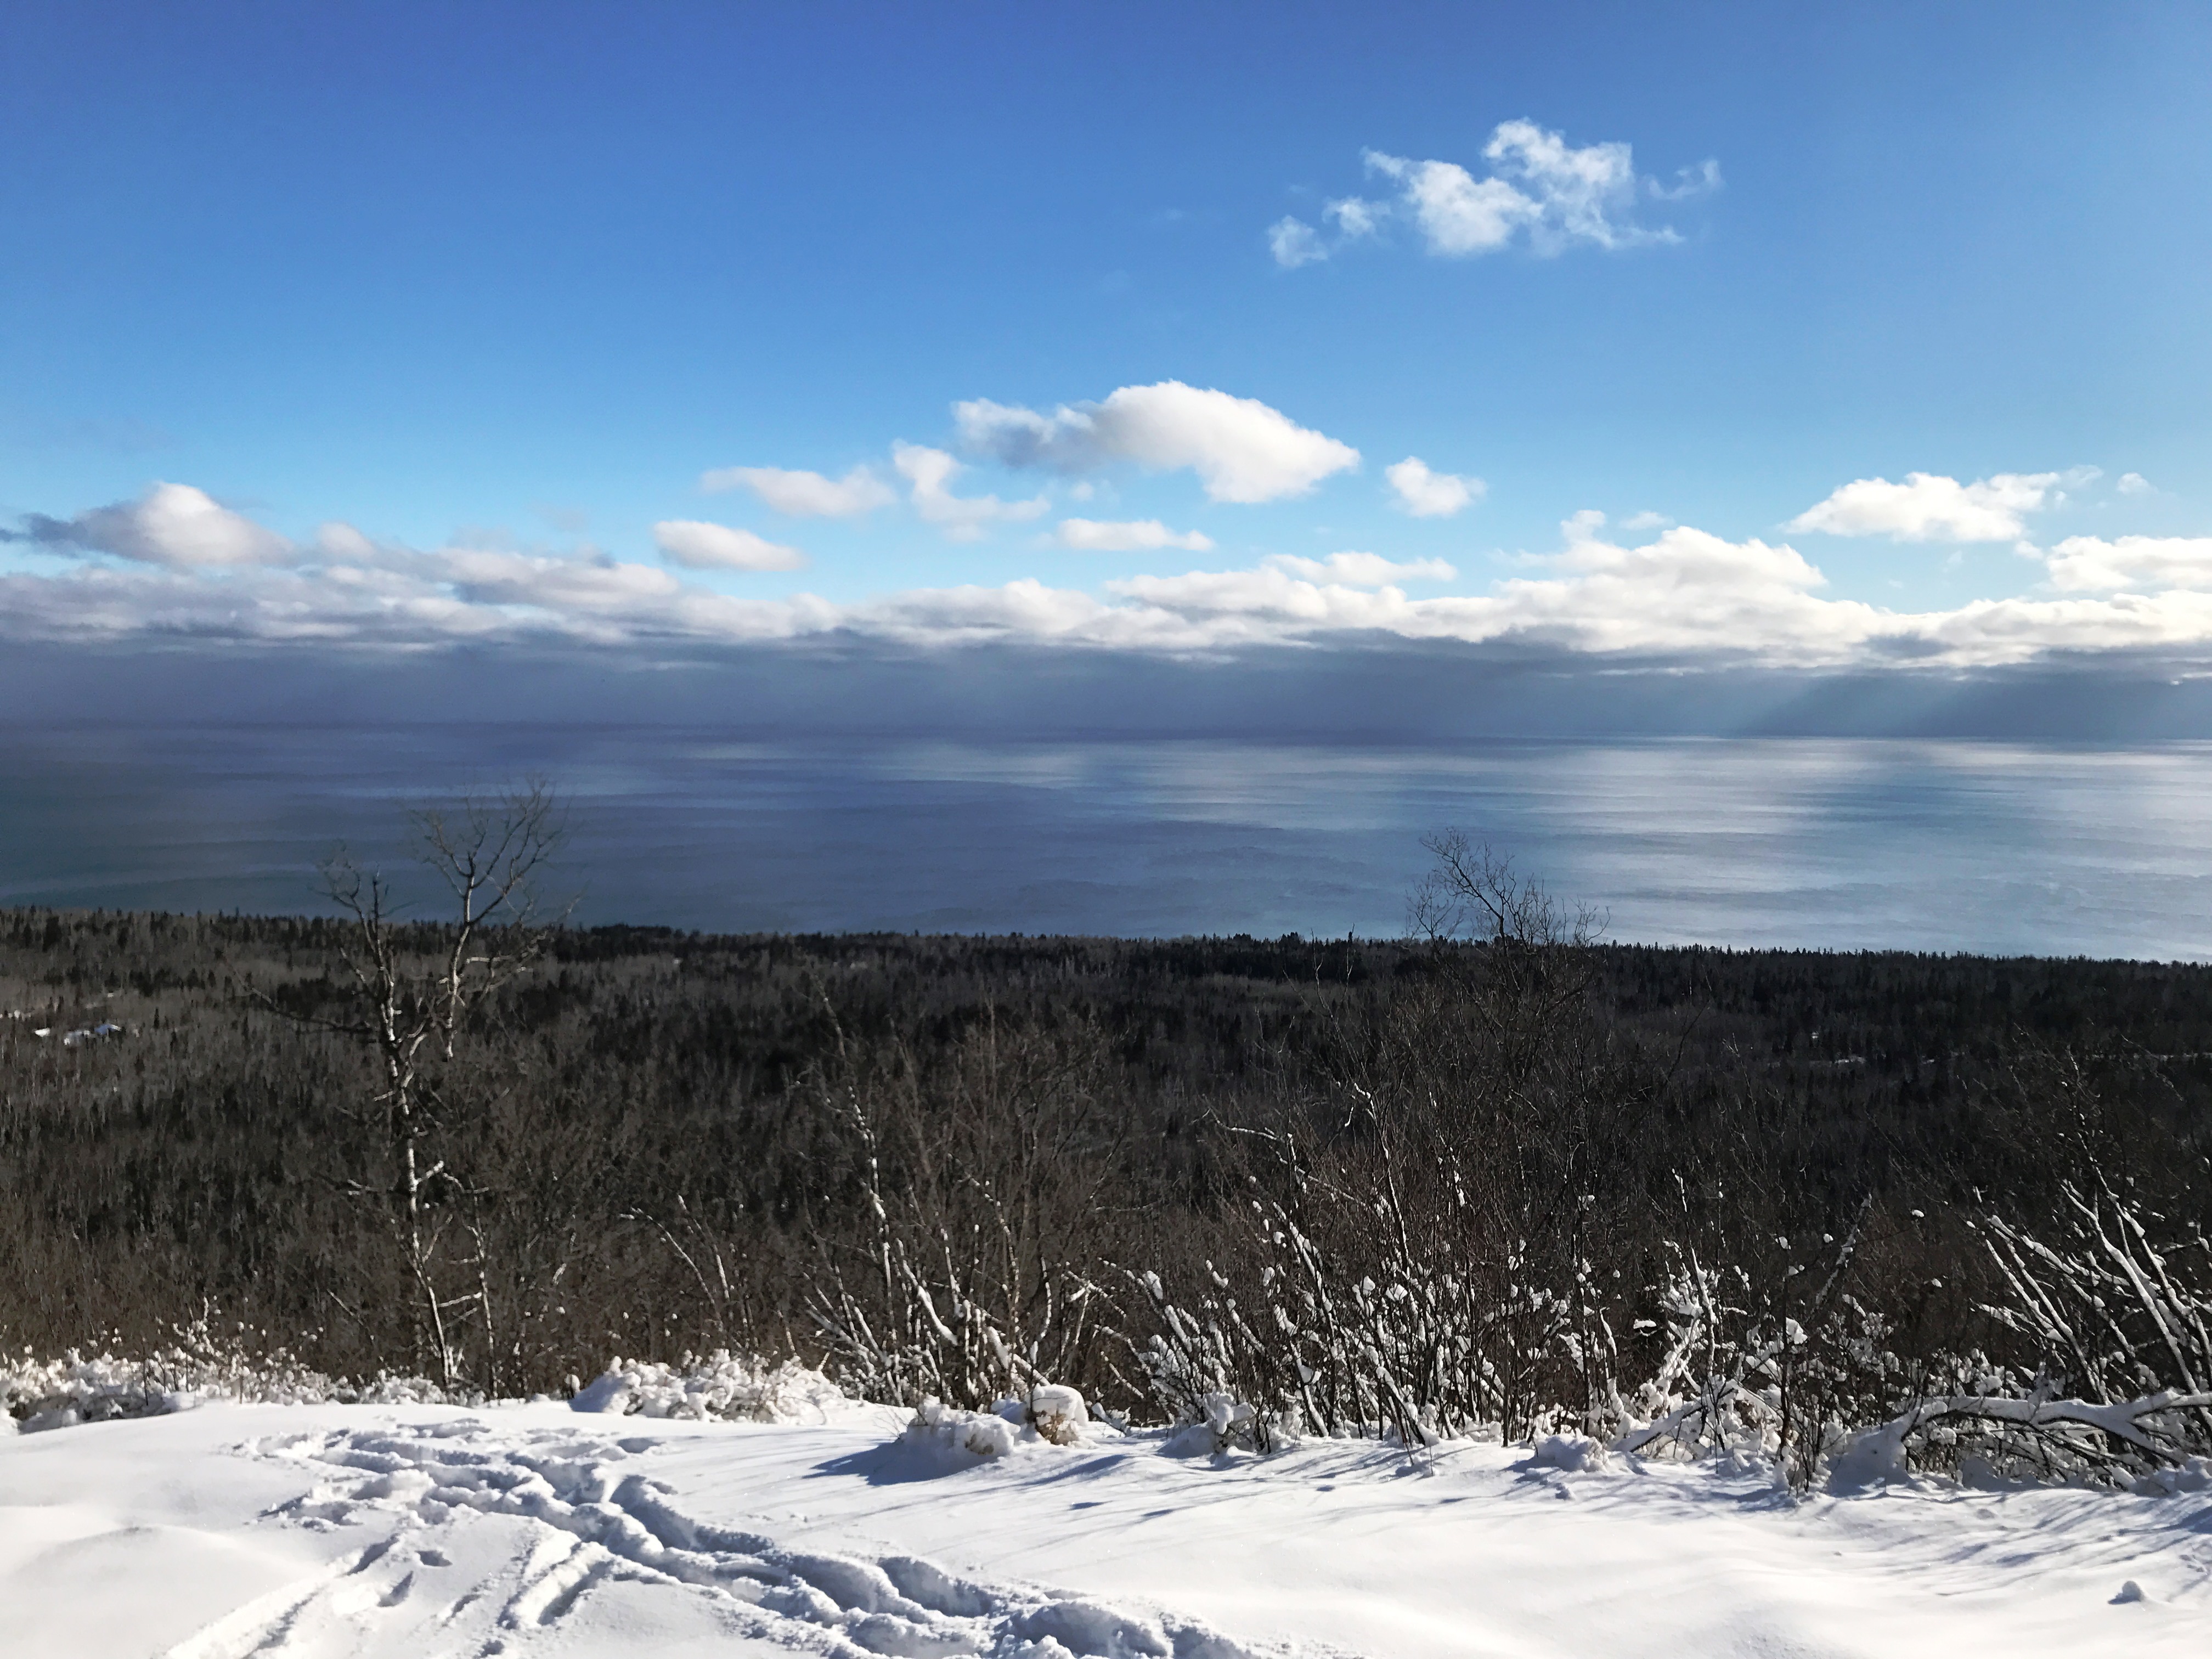 Winter View From Oberg Mountain - Dec. 20, 2016